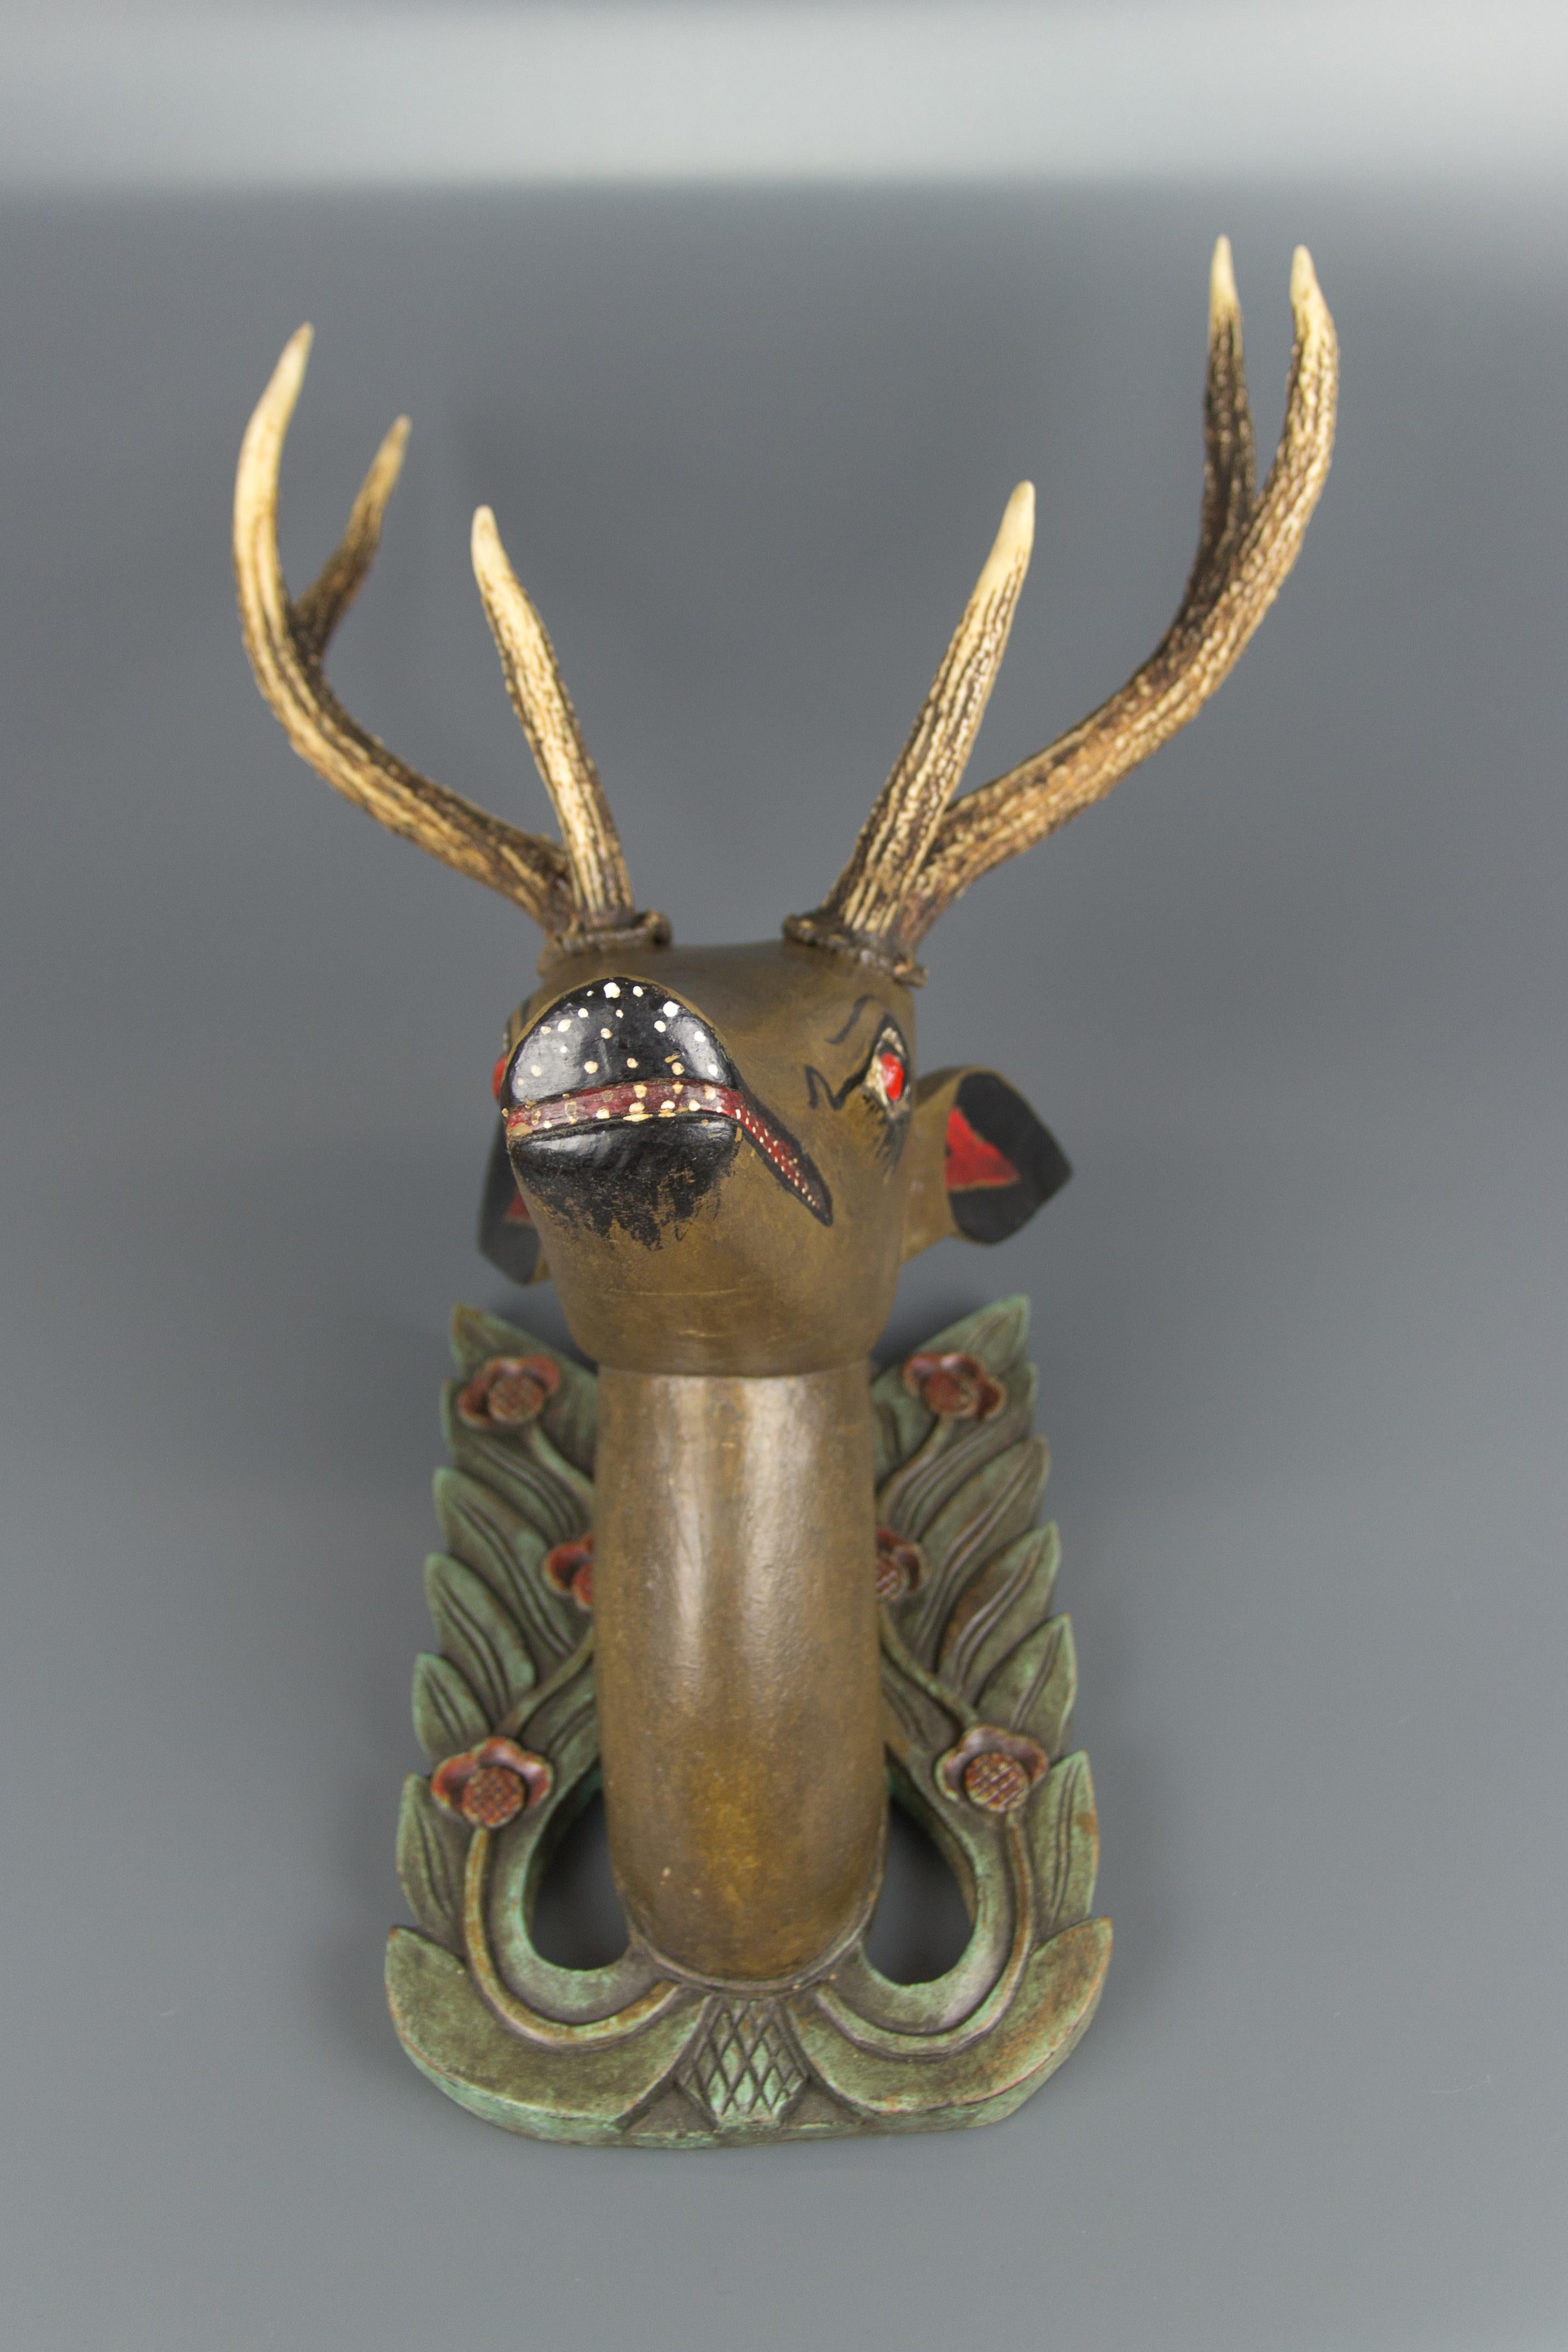 German Hand Carved and Hand Painted Wood Deer Head with Antlers, Wall Plaque In Good Condition For Sale In Barntrup, DE